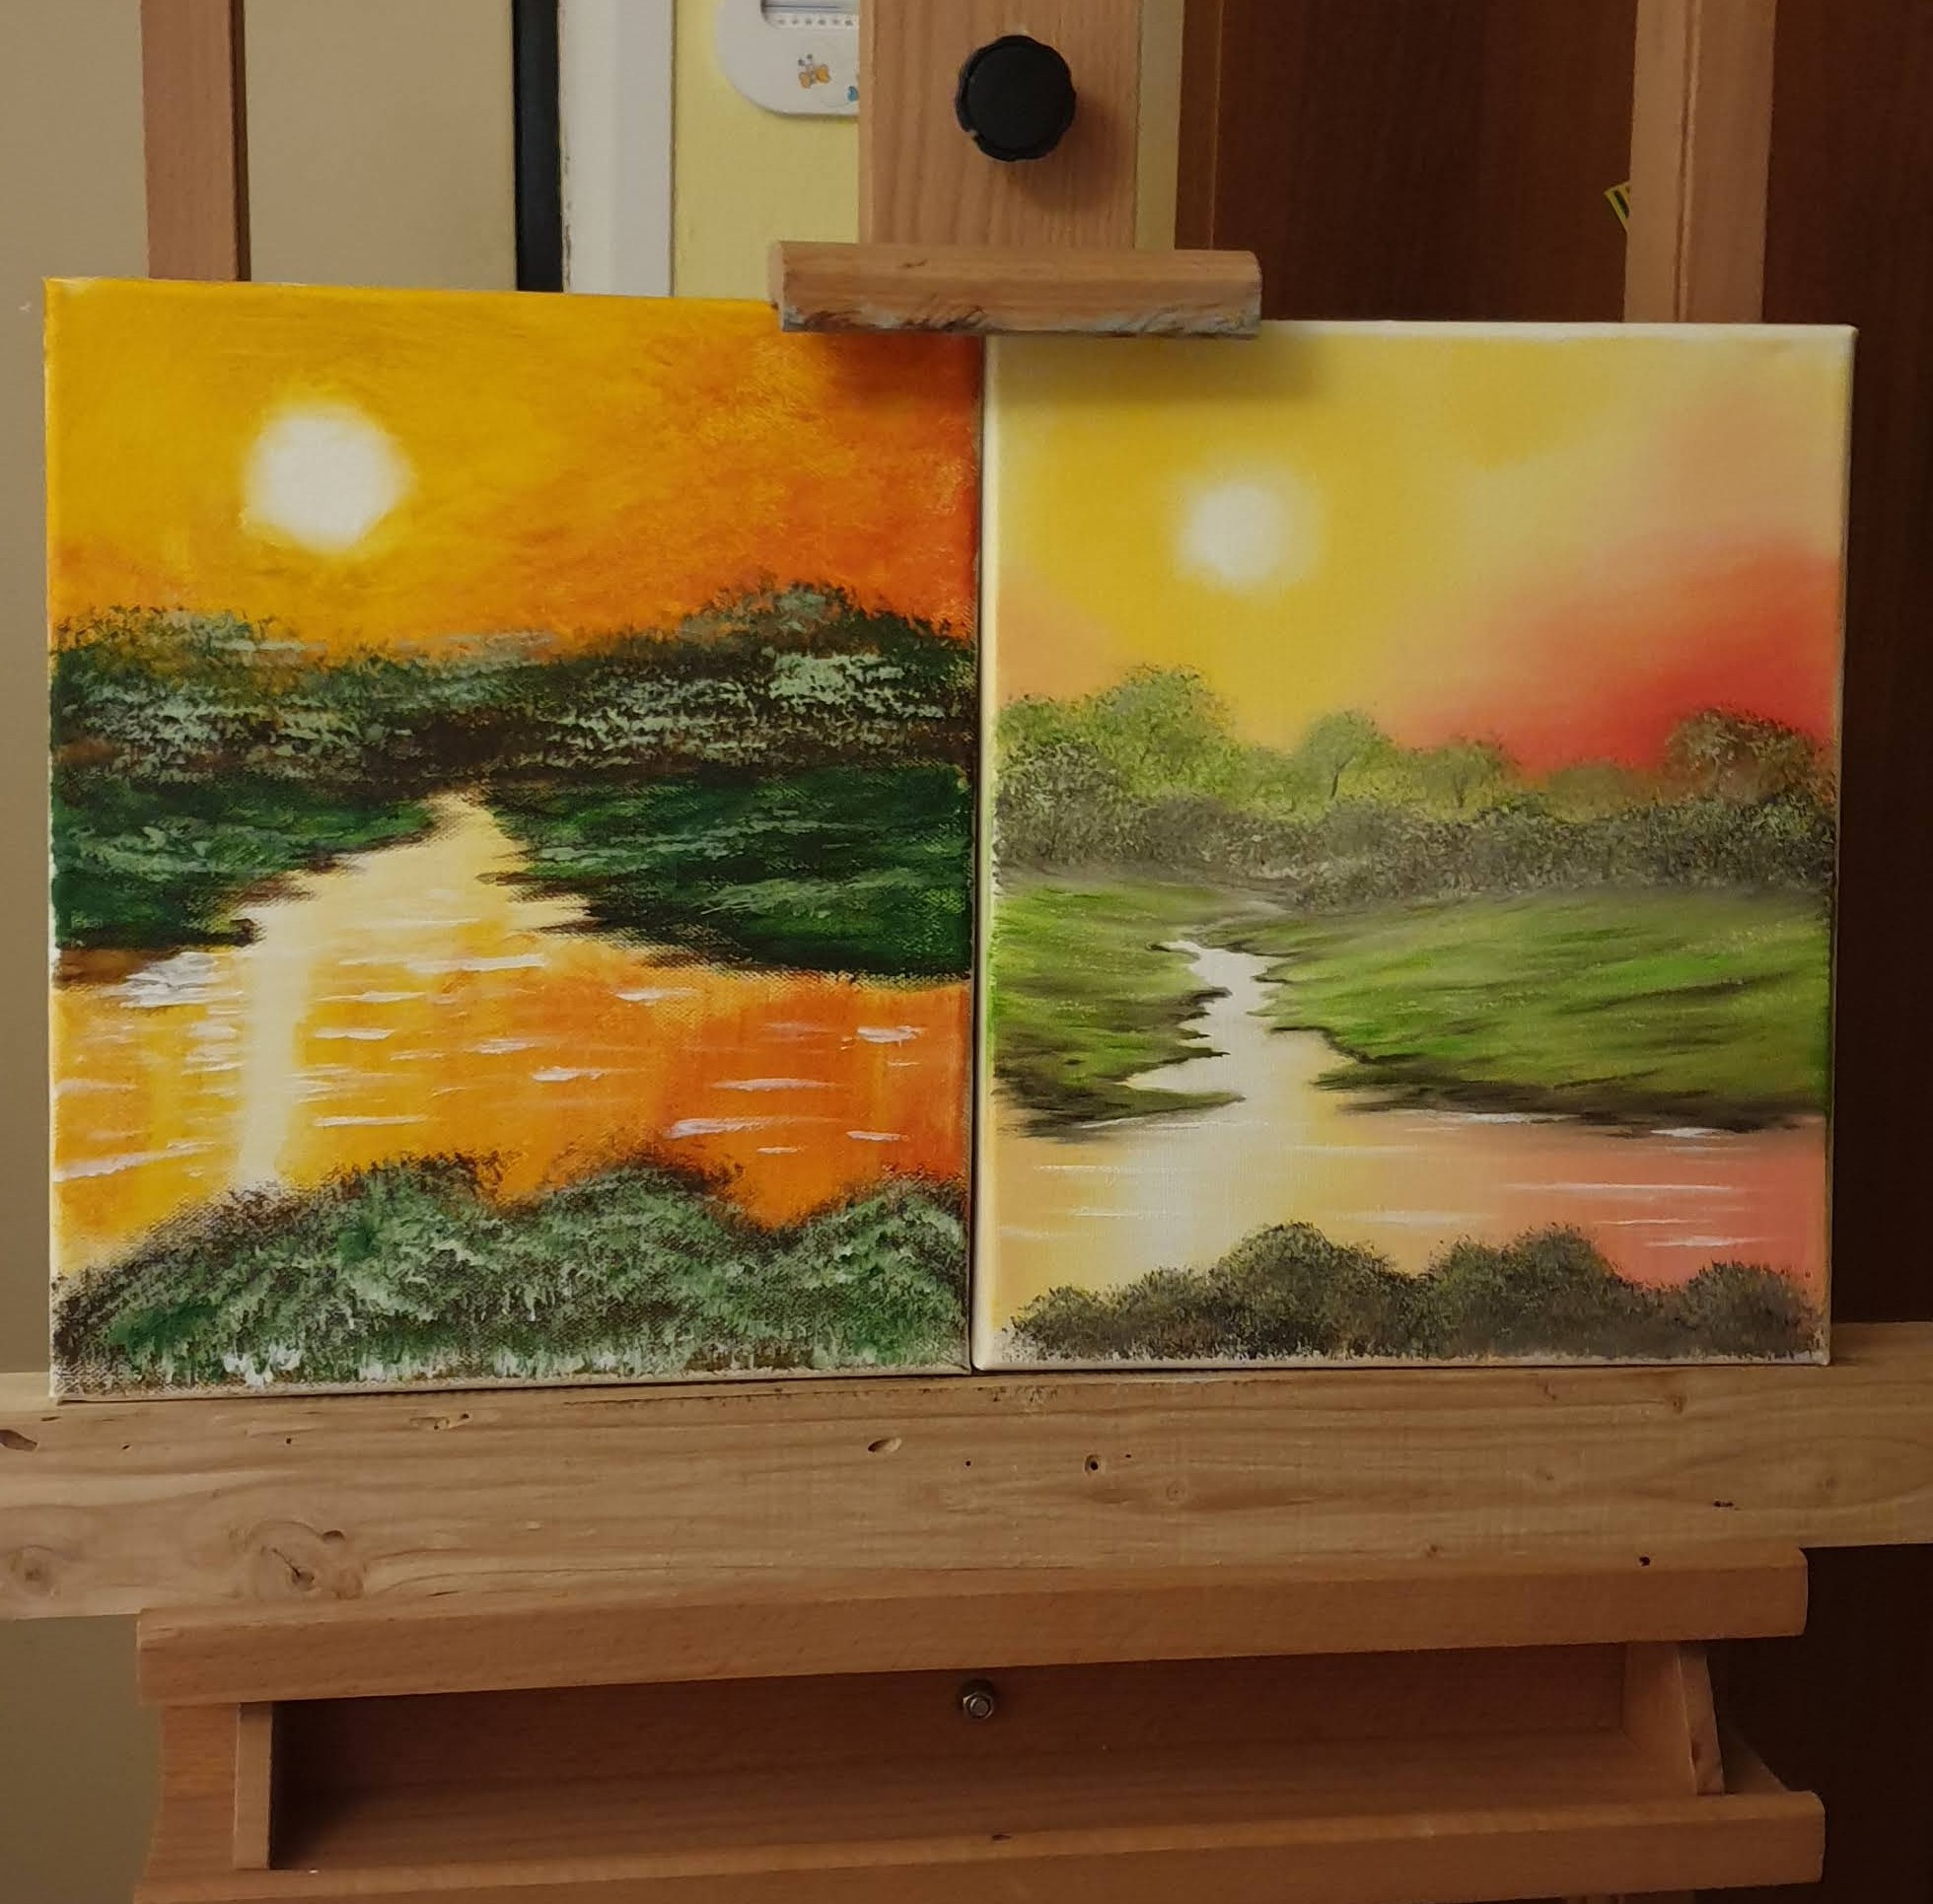 The Sunset painting comparing before and after a year.